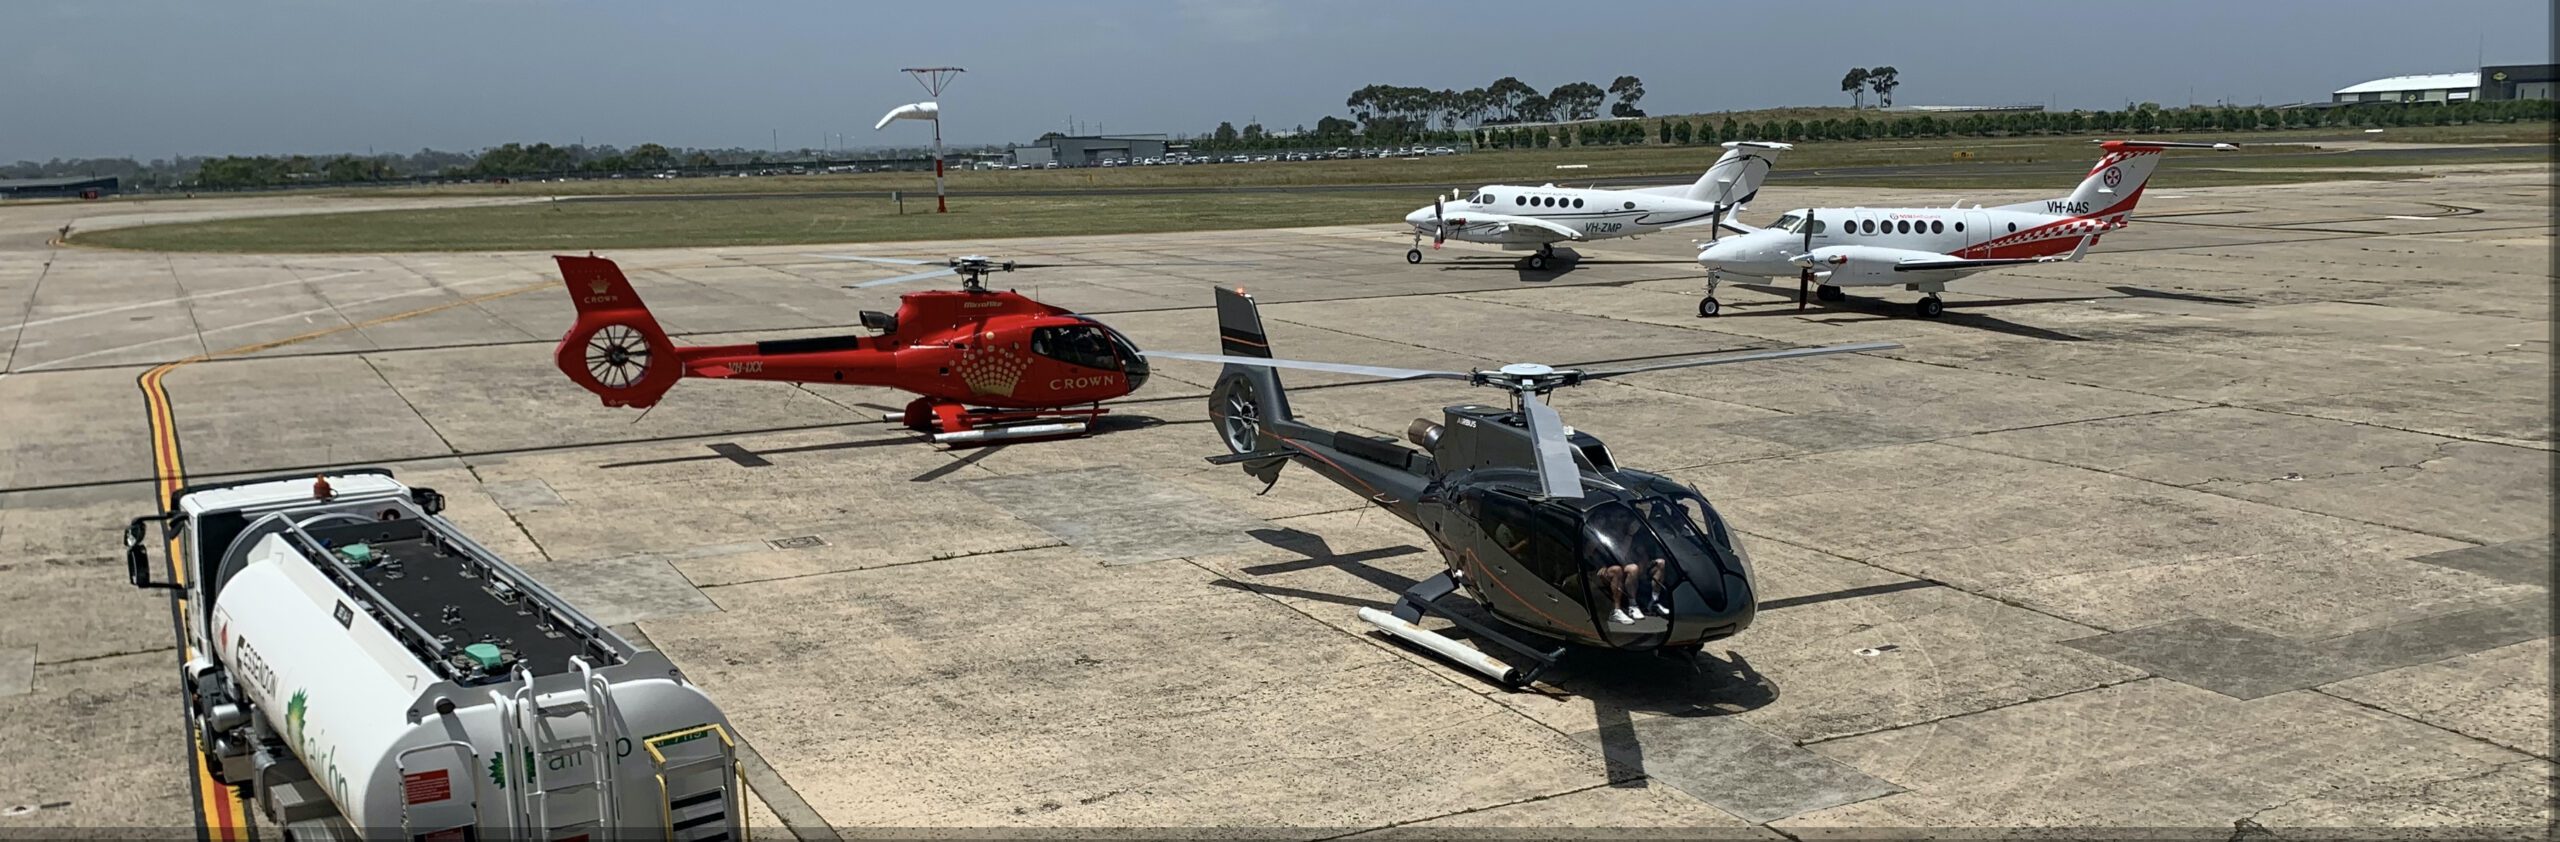 Corporate Helicopter Charter, Melbourne helicopter, Helicopter Charter, Melbourne Helicopter rides, EC-130, winery tours melbourne, flights melbourne